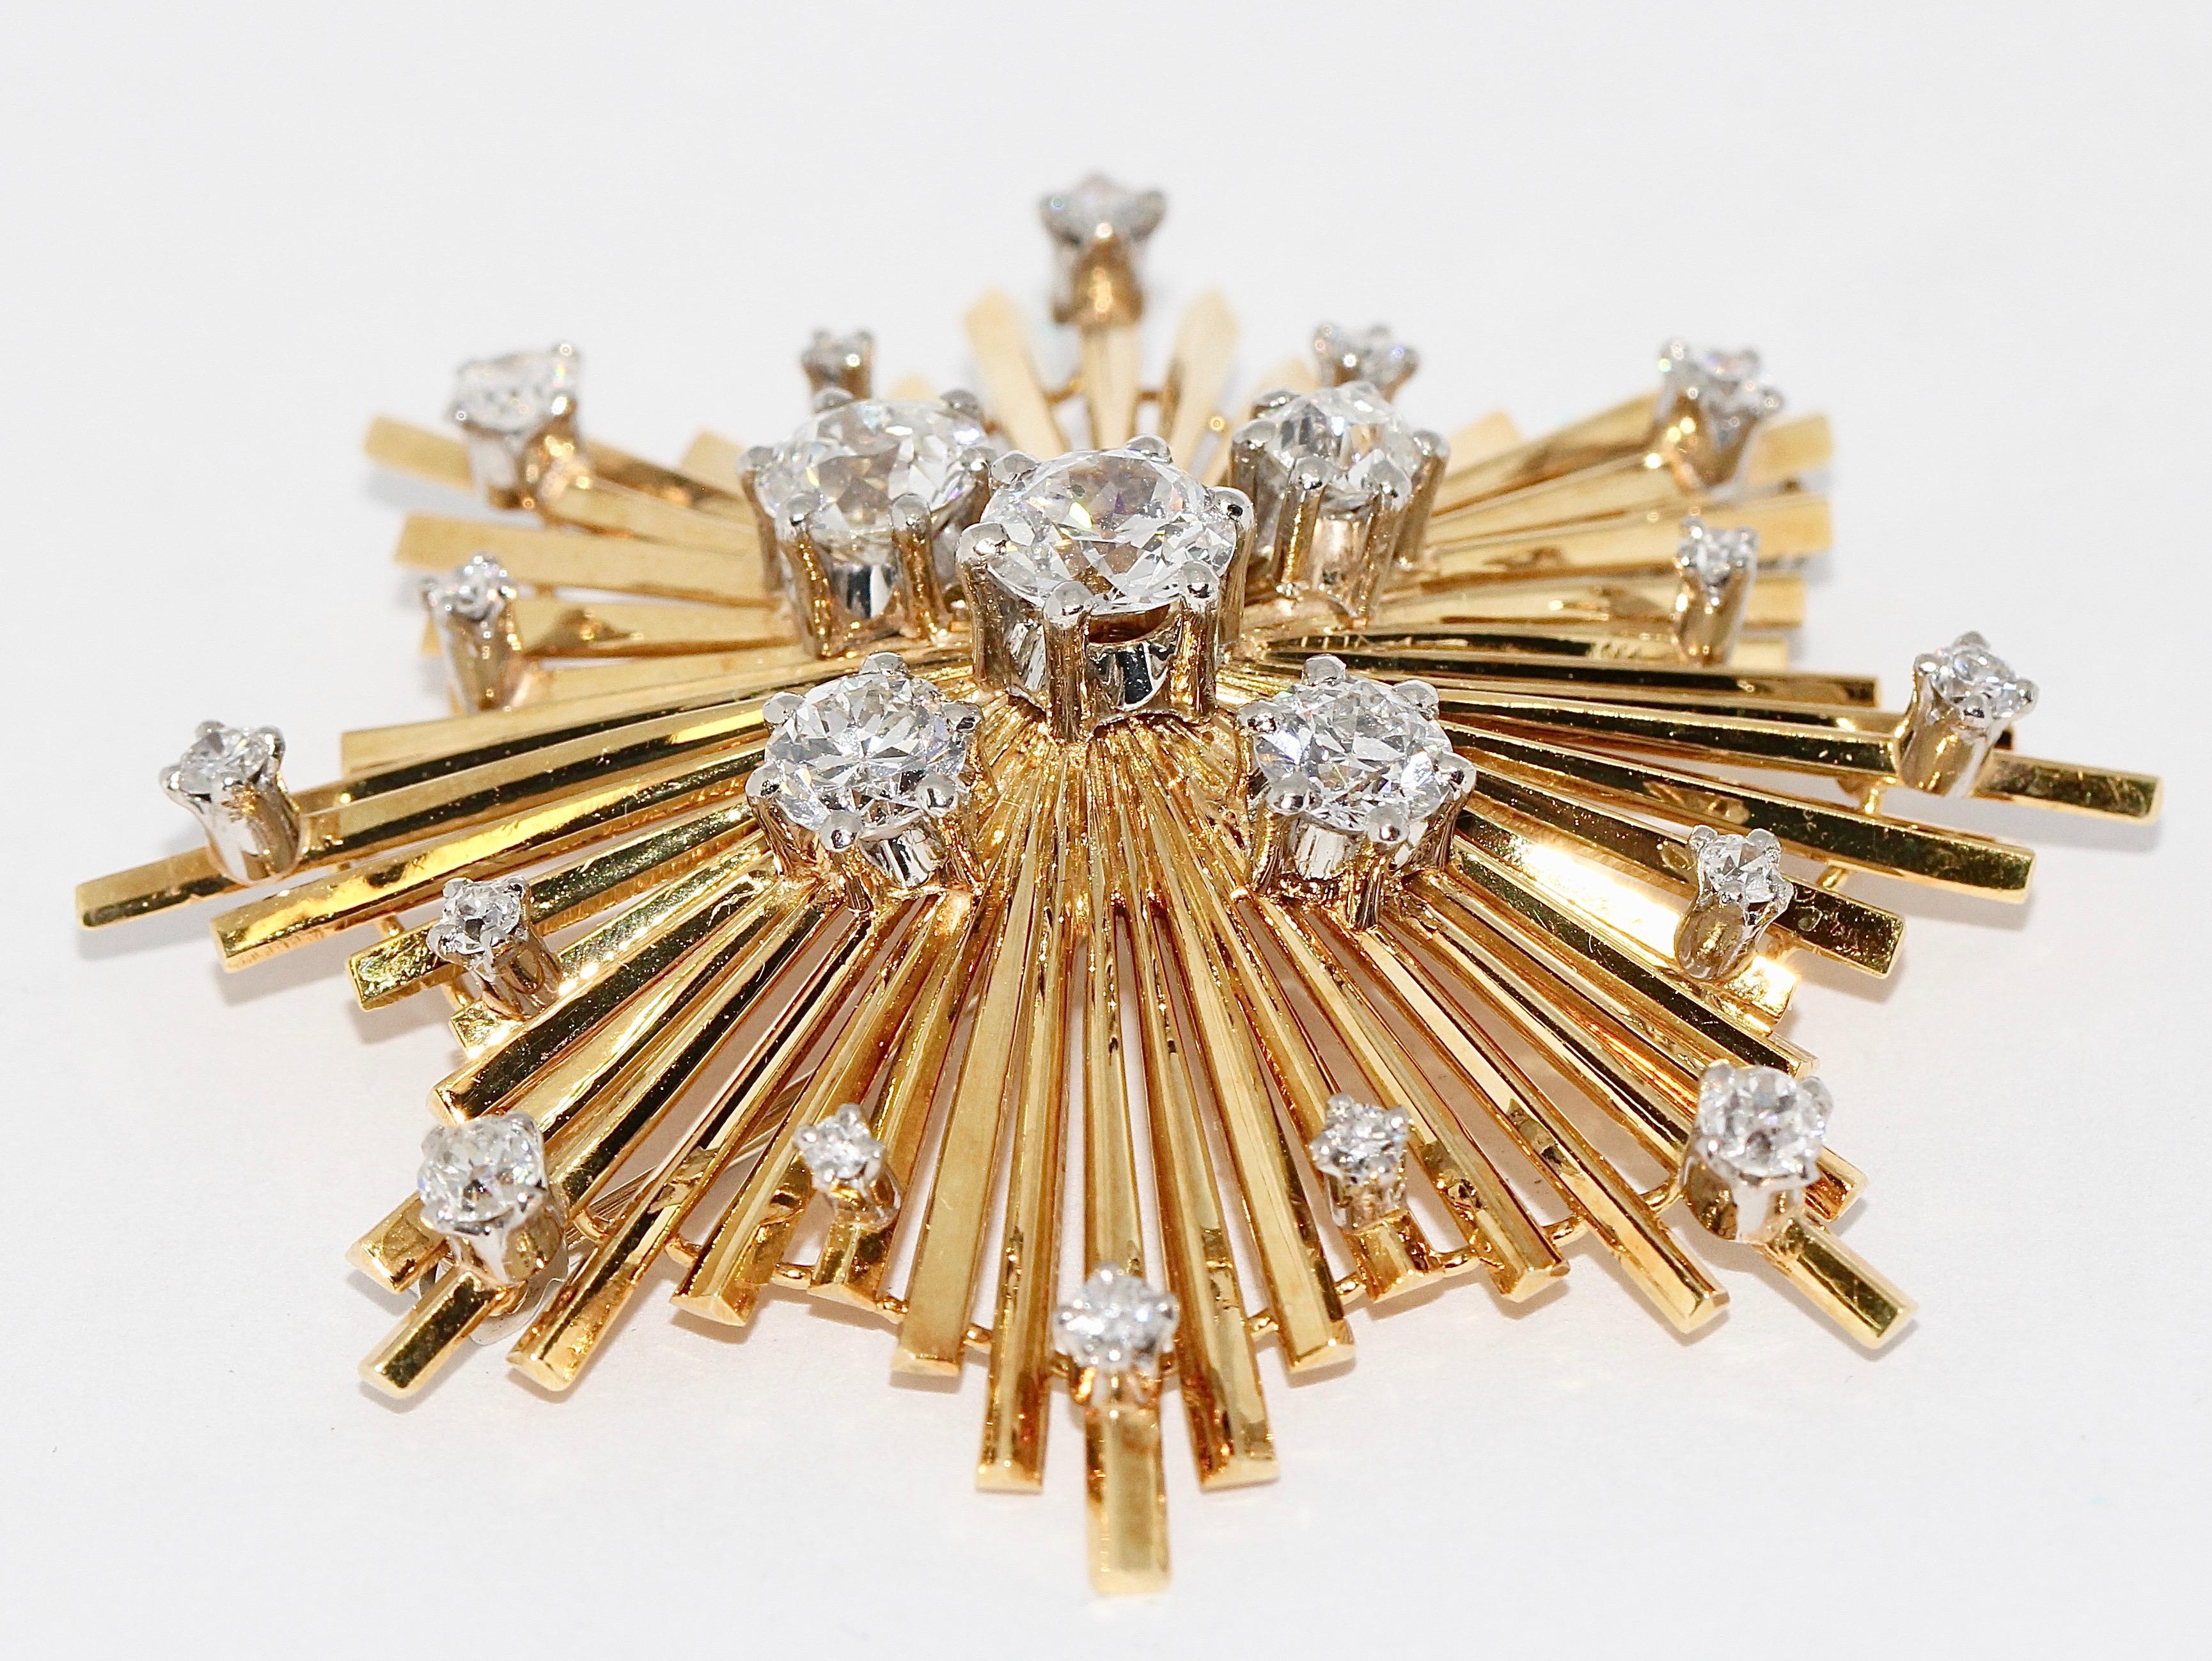 18 Karat Gold Brooch with Diamonds.

Enchanting gold brooch, set with many old cut diamonds.
The five large, central diamonds each have a size of approx.:

0.23 carat
0.33 carat
0.35 carat
0.6 carat
0.7 carat

The diamonds have a natural white color